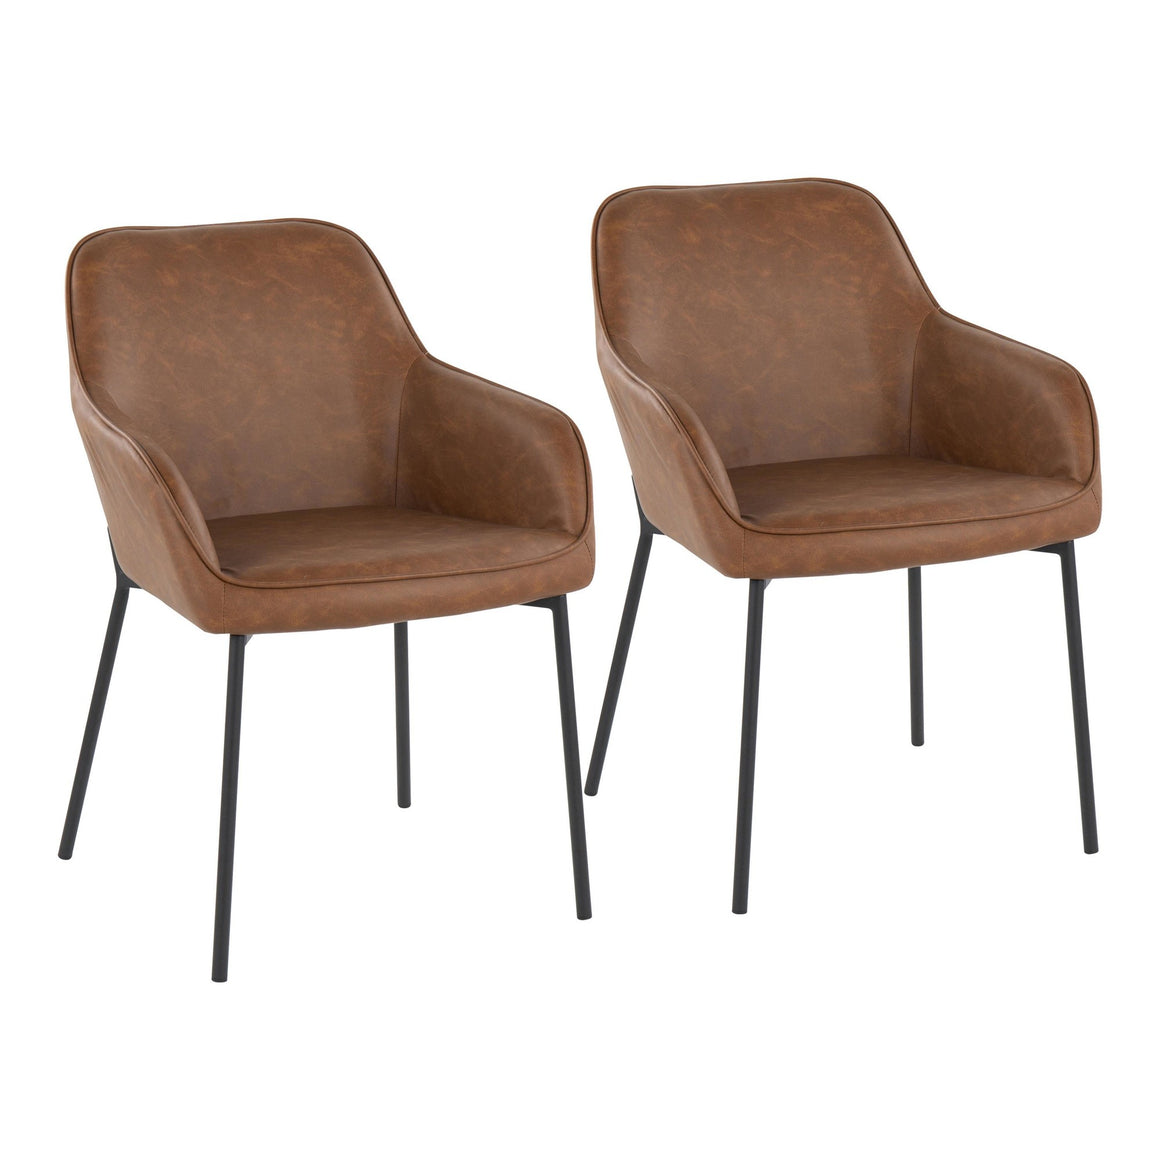 Daniella Contemporary Dining Chair in Black Steel and Camel Faux Leather by LumiSource - Set of 2